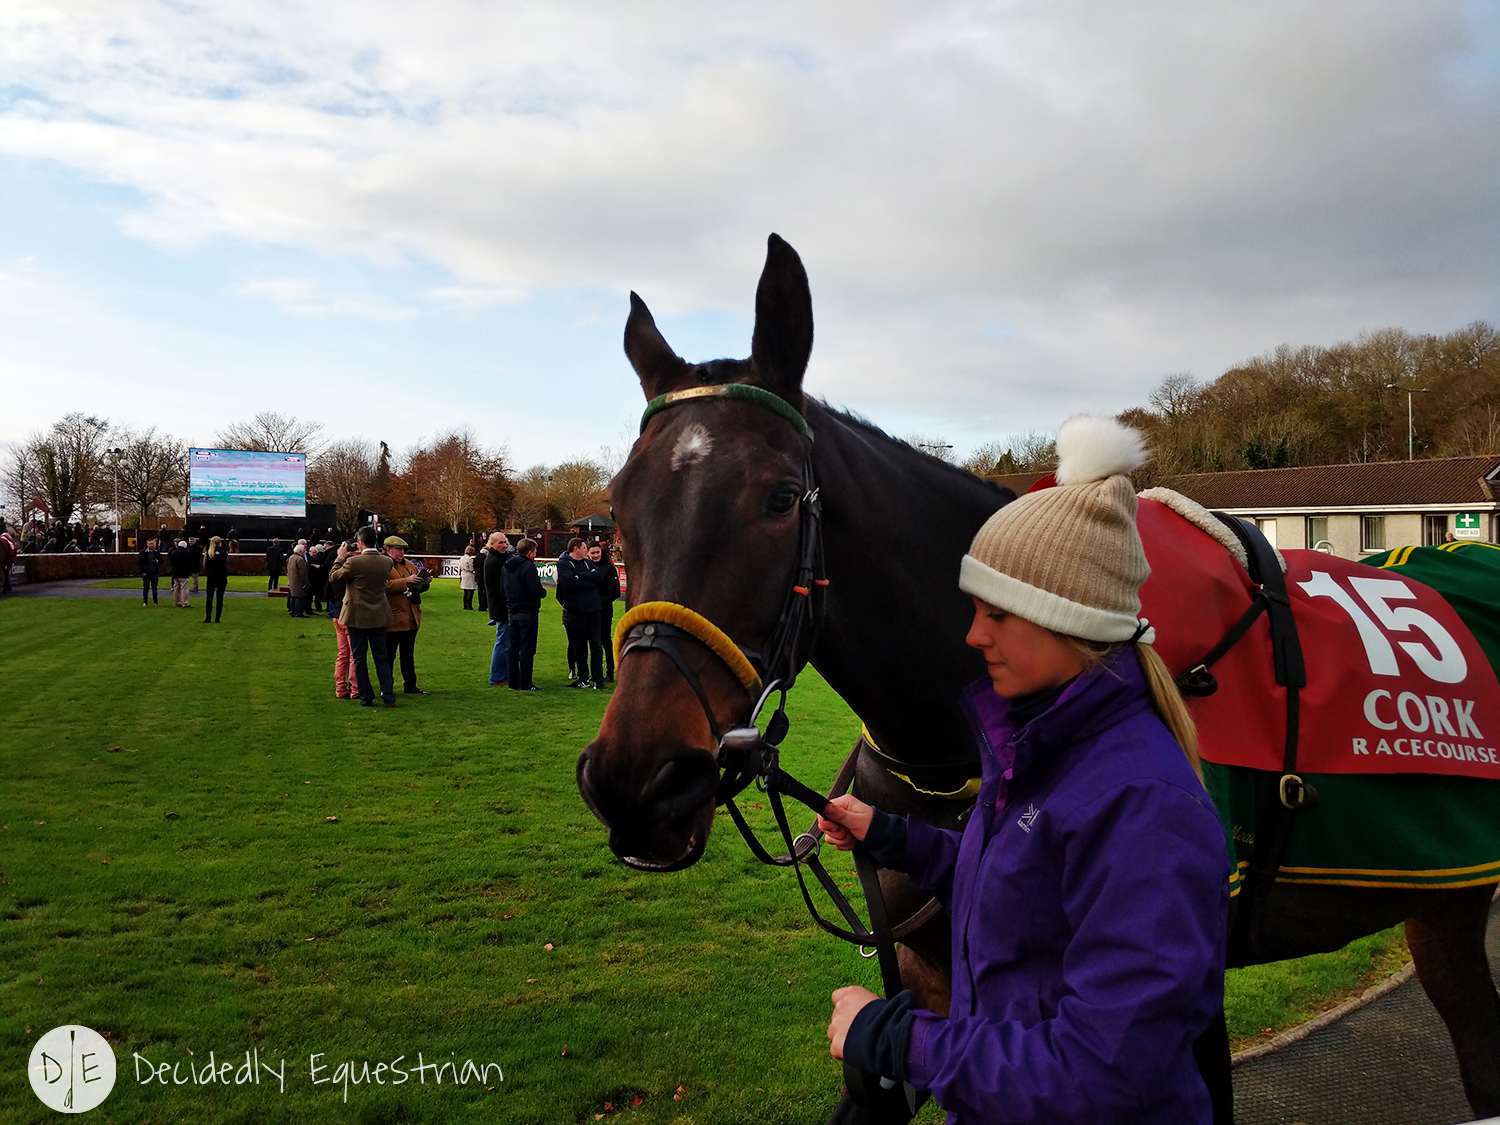 Finding Horses While Traveling - Ireland - Cork Racecourse